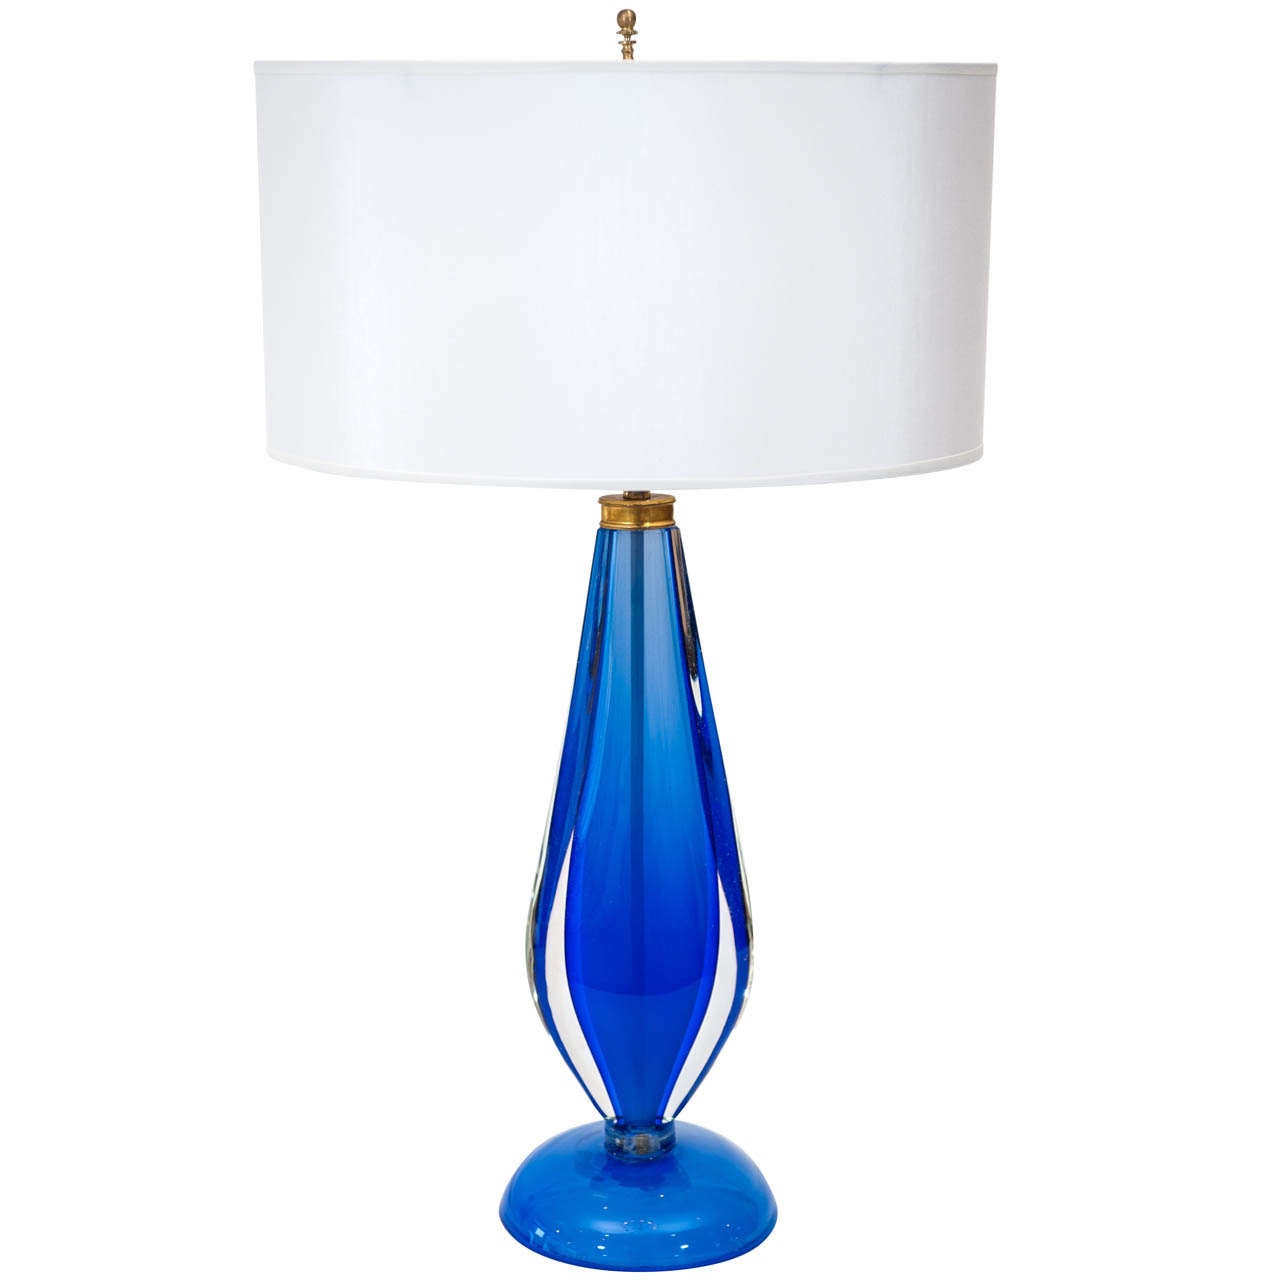 Blue Sommerso Murano Glass Lamp Attributed to Salviati